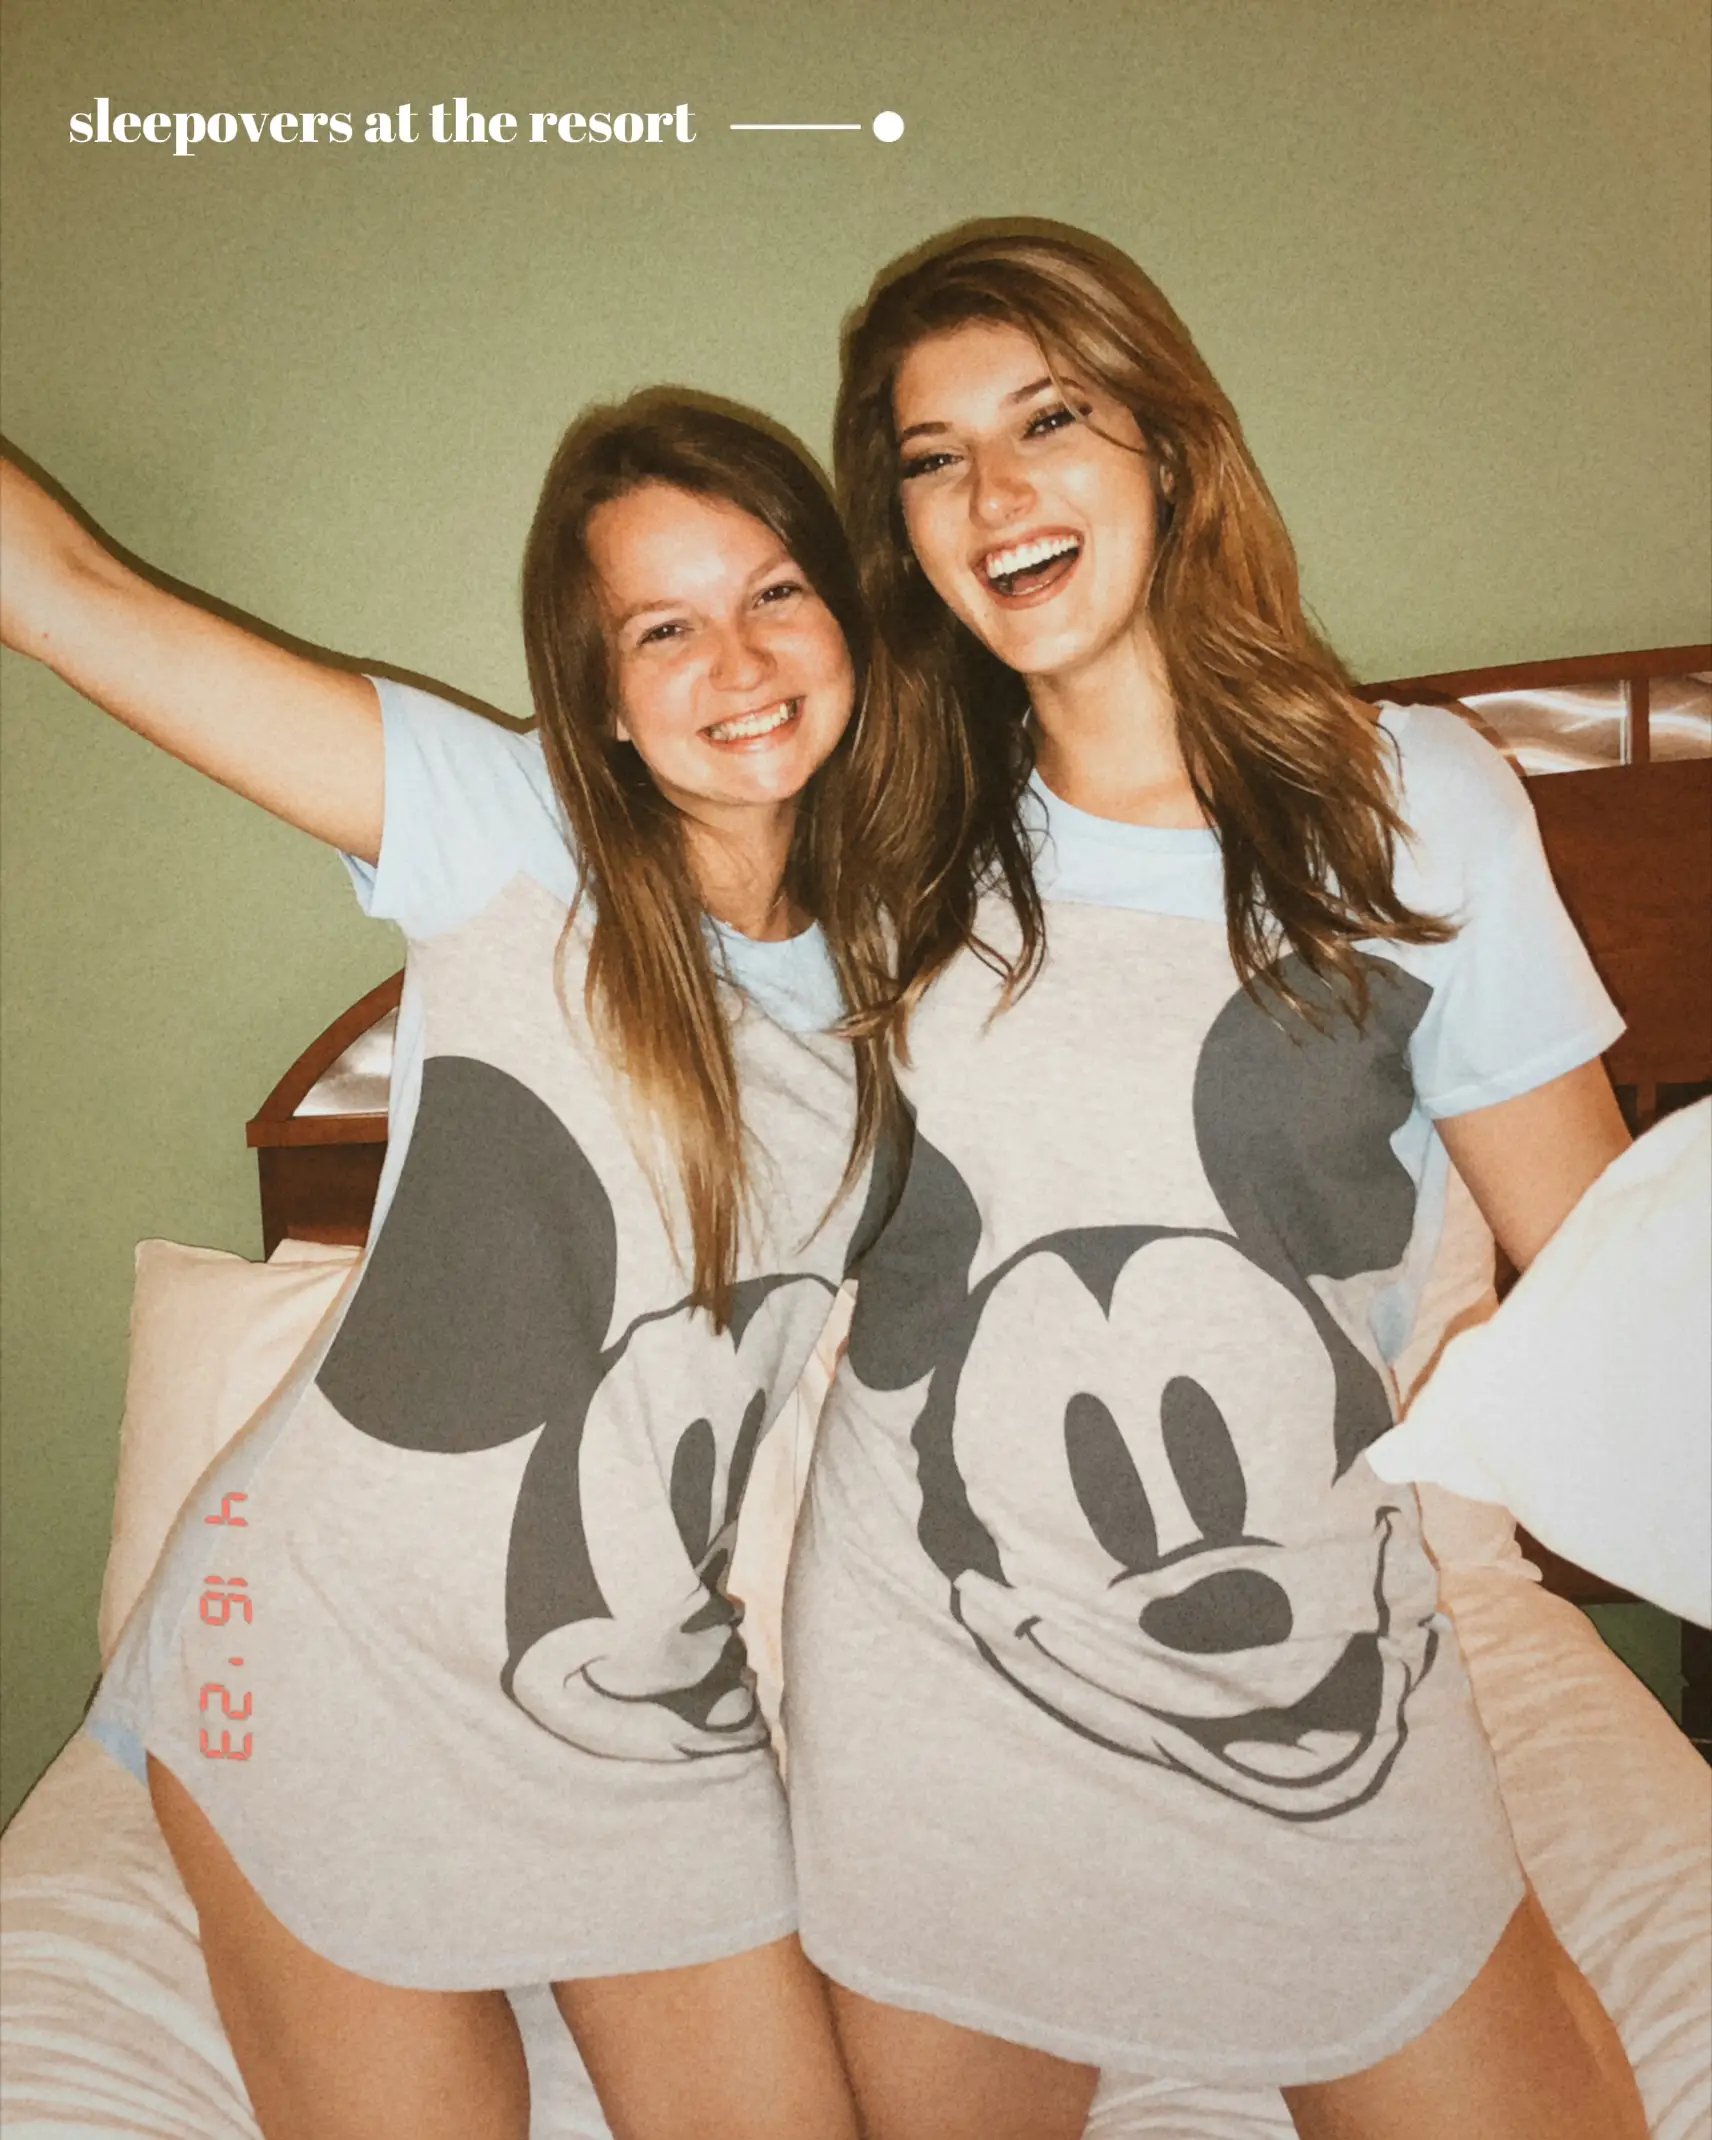  Two women wearing Mickey Mouse shirts are standing next to each other.